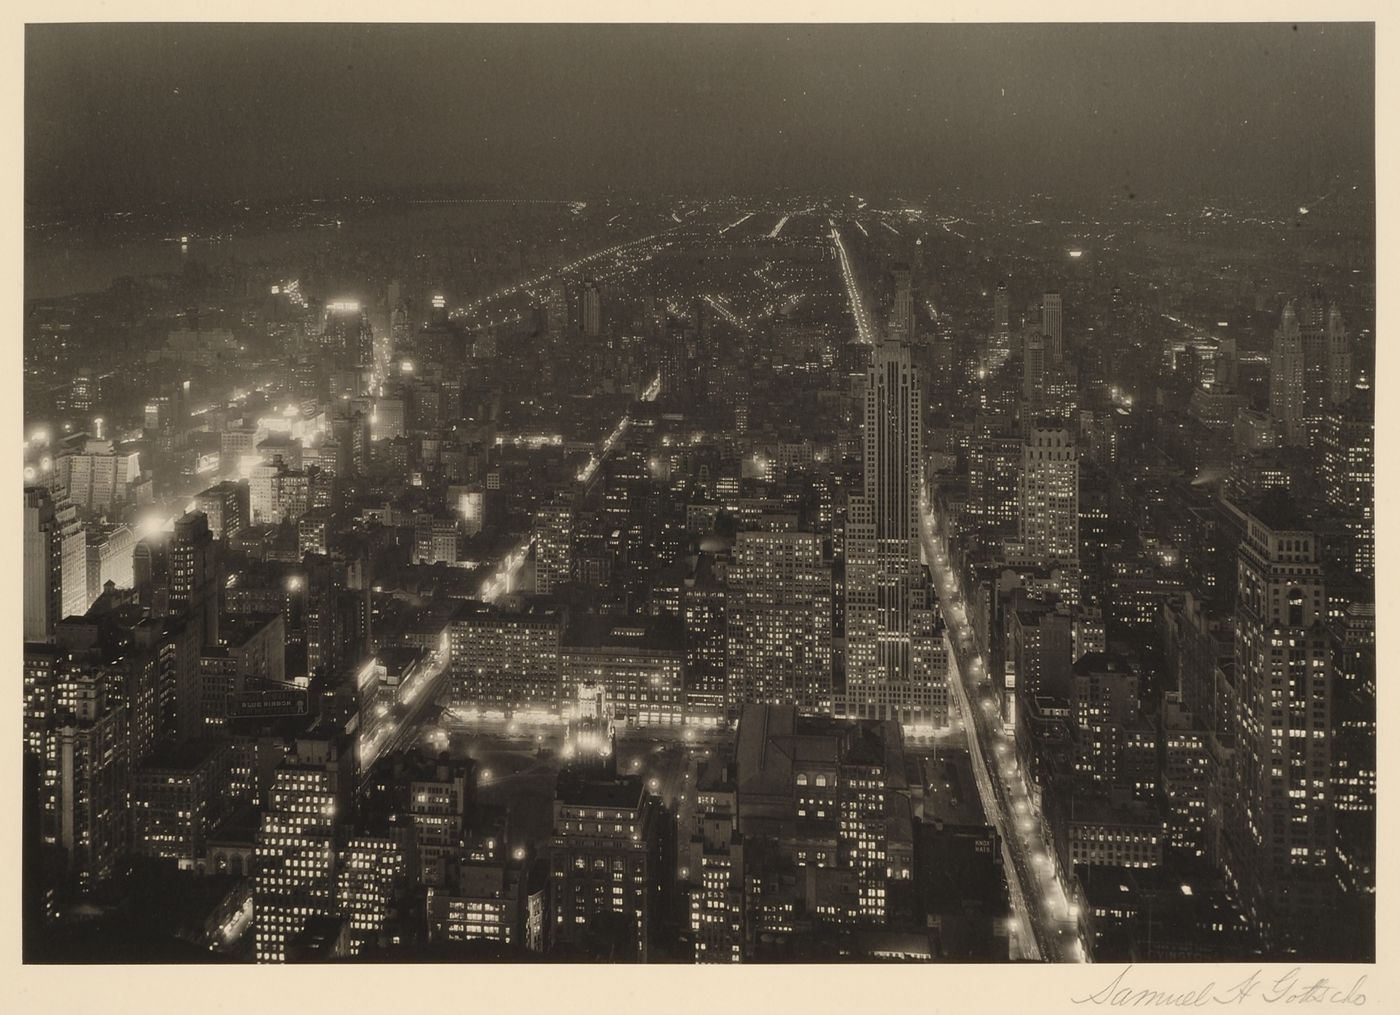 Looking North toward Central Park between 5 and 6th Avenues from Empire State Building at night, New York City, New York